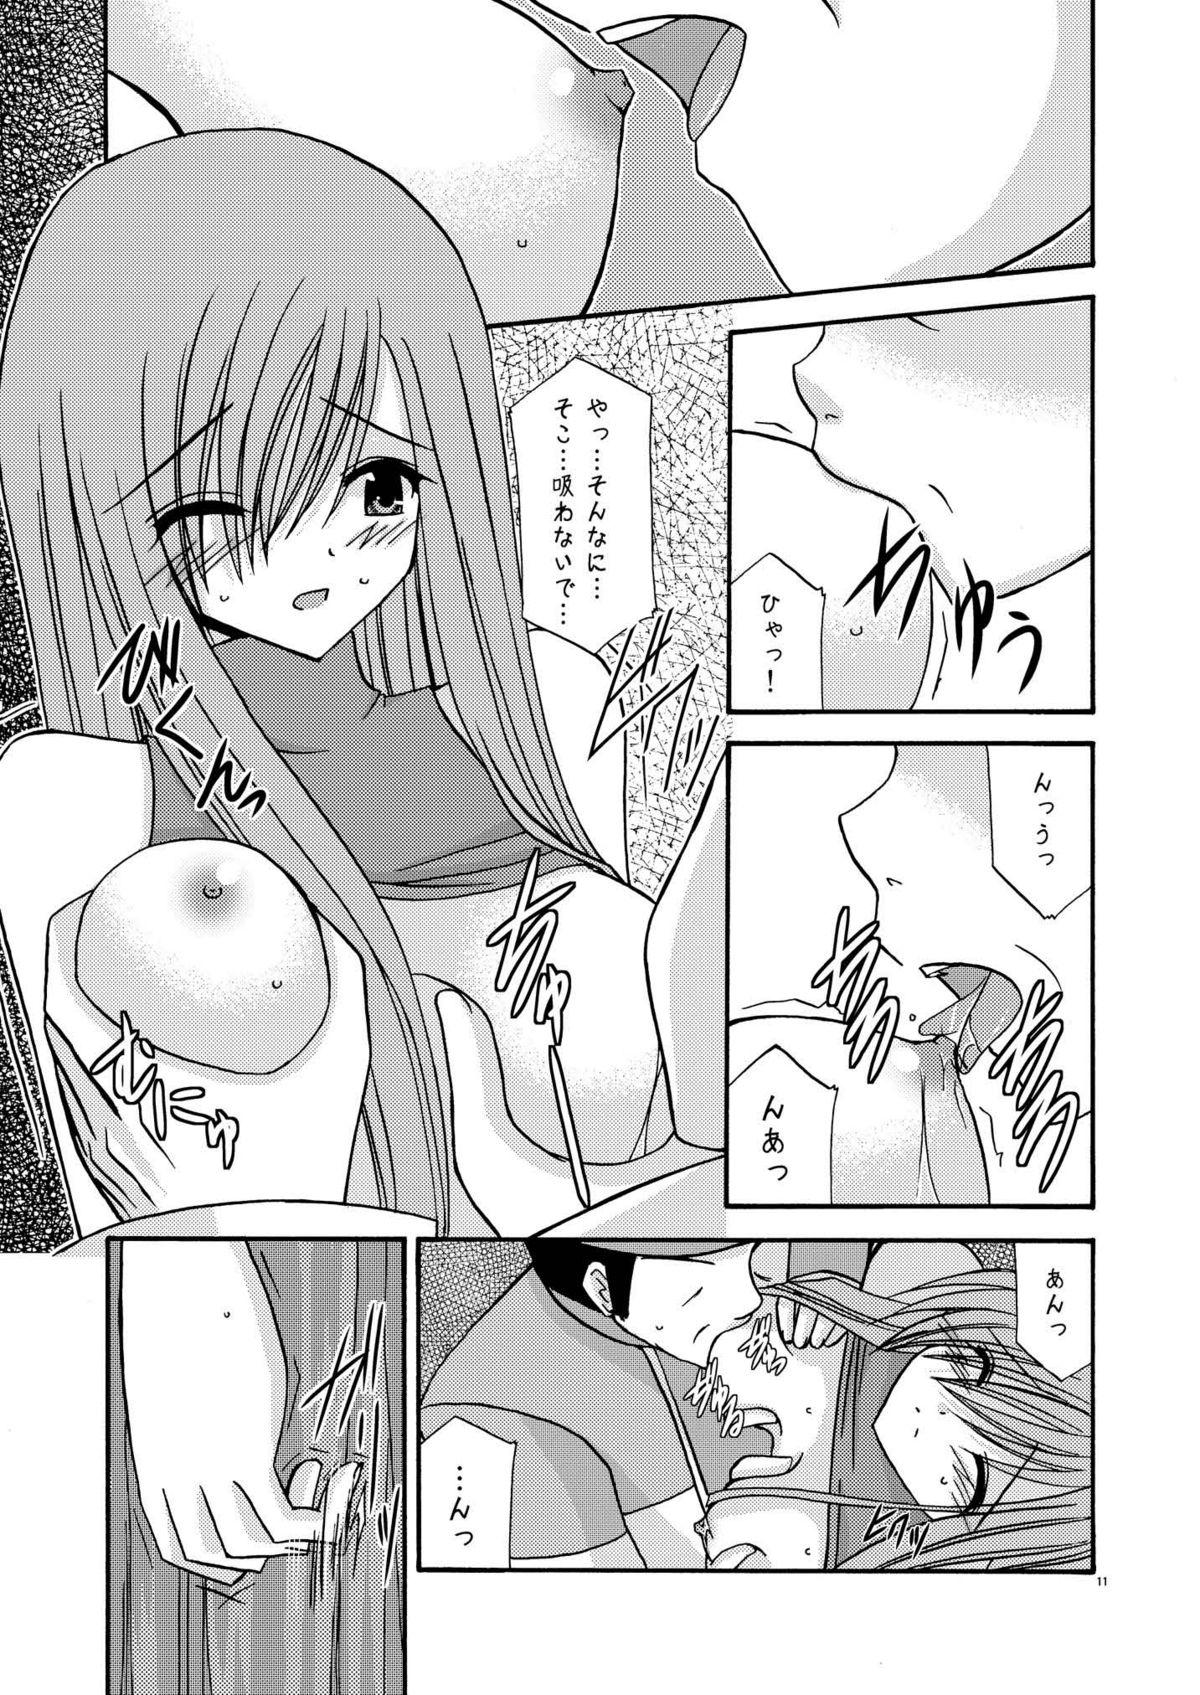 Sensual Tales of Phallus vol.2 - Tales of the abyss Camgirl - Page 11